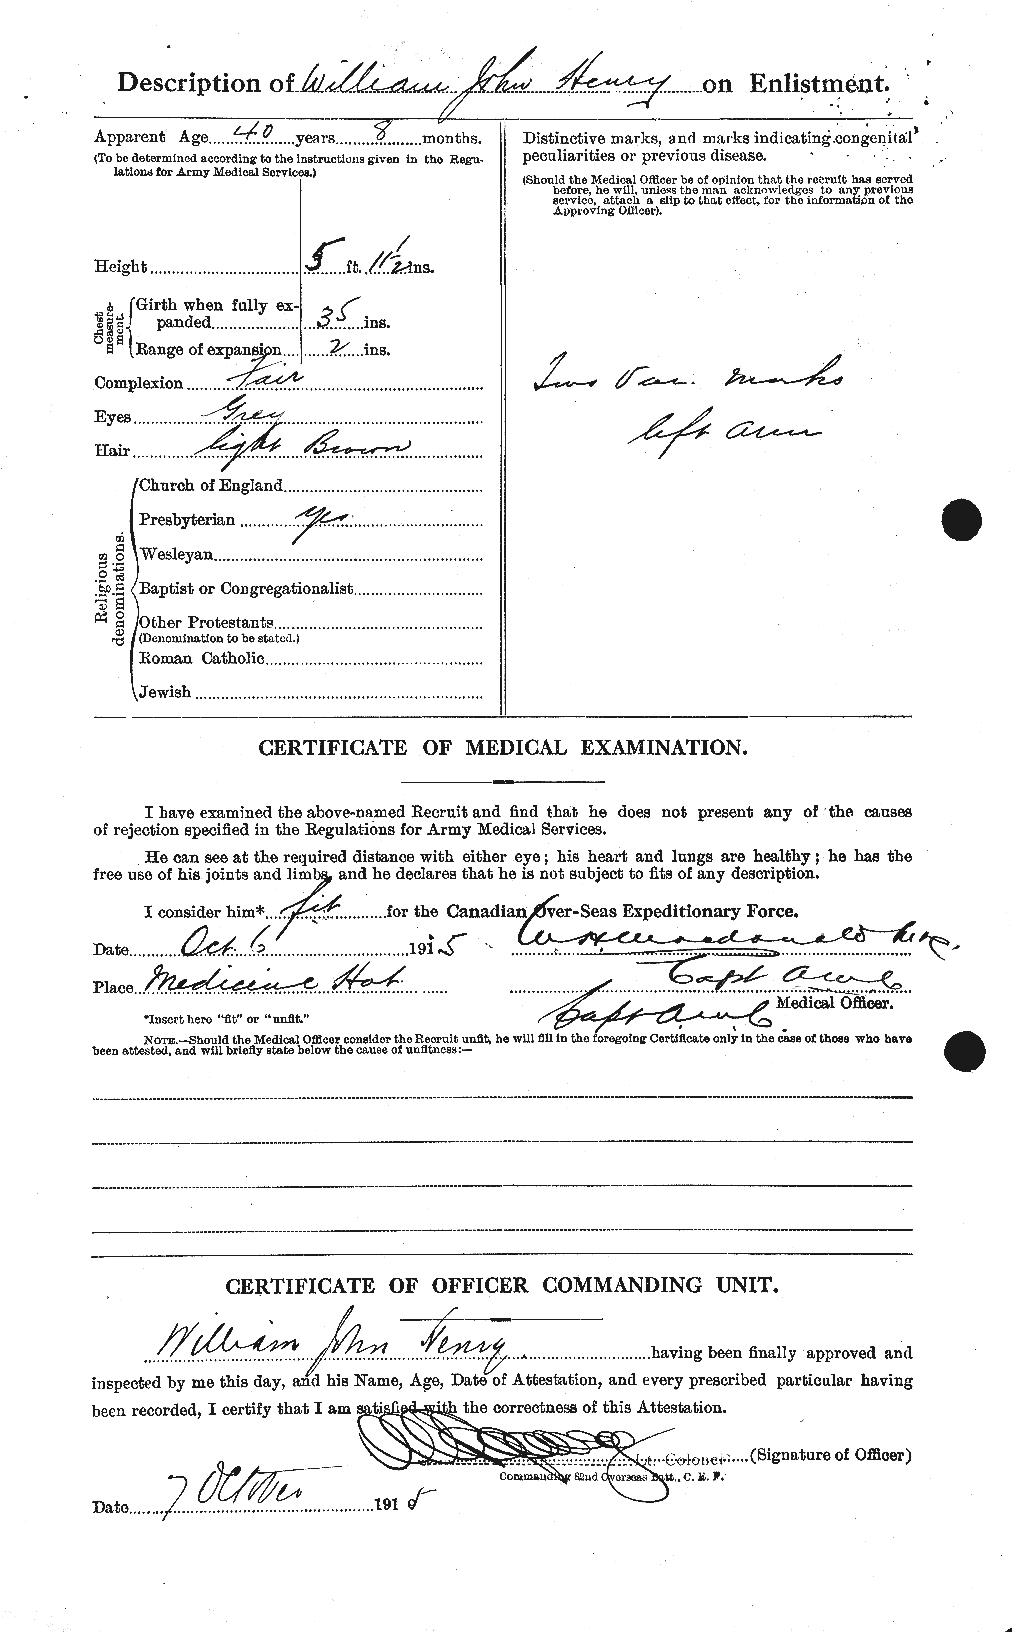 Personnel Records of the First World War - CEF 387785b